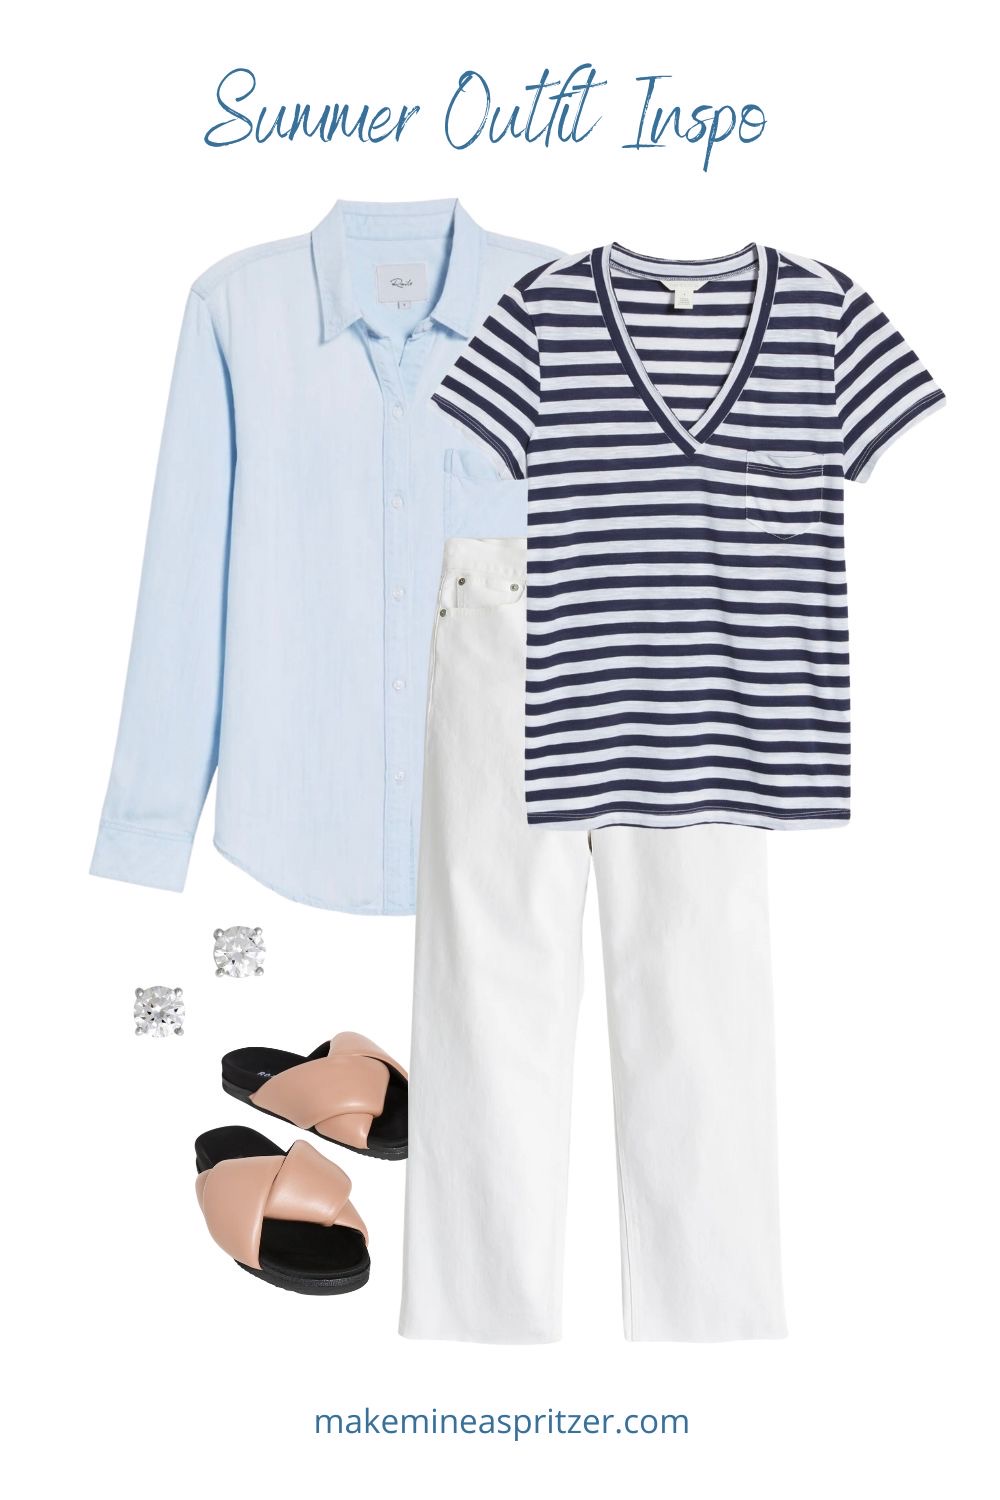 Striped tee shirt with white pants and blue shirt collage.